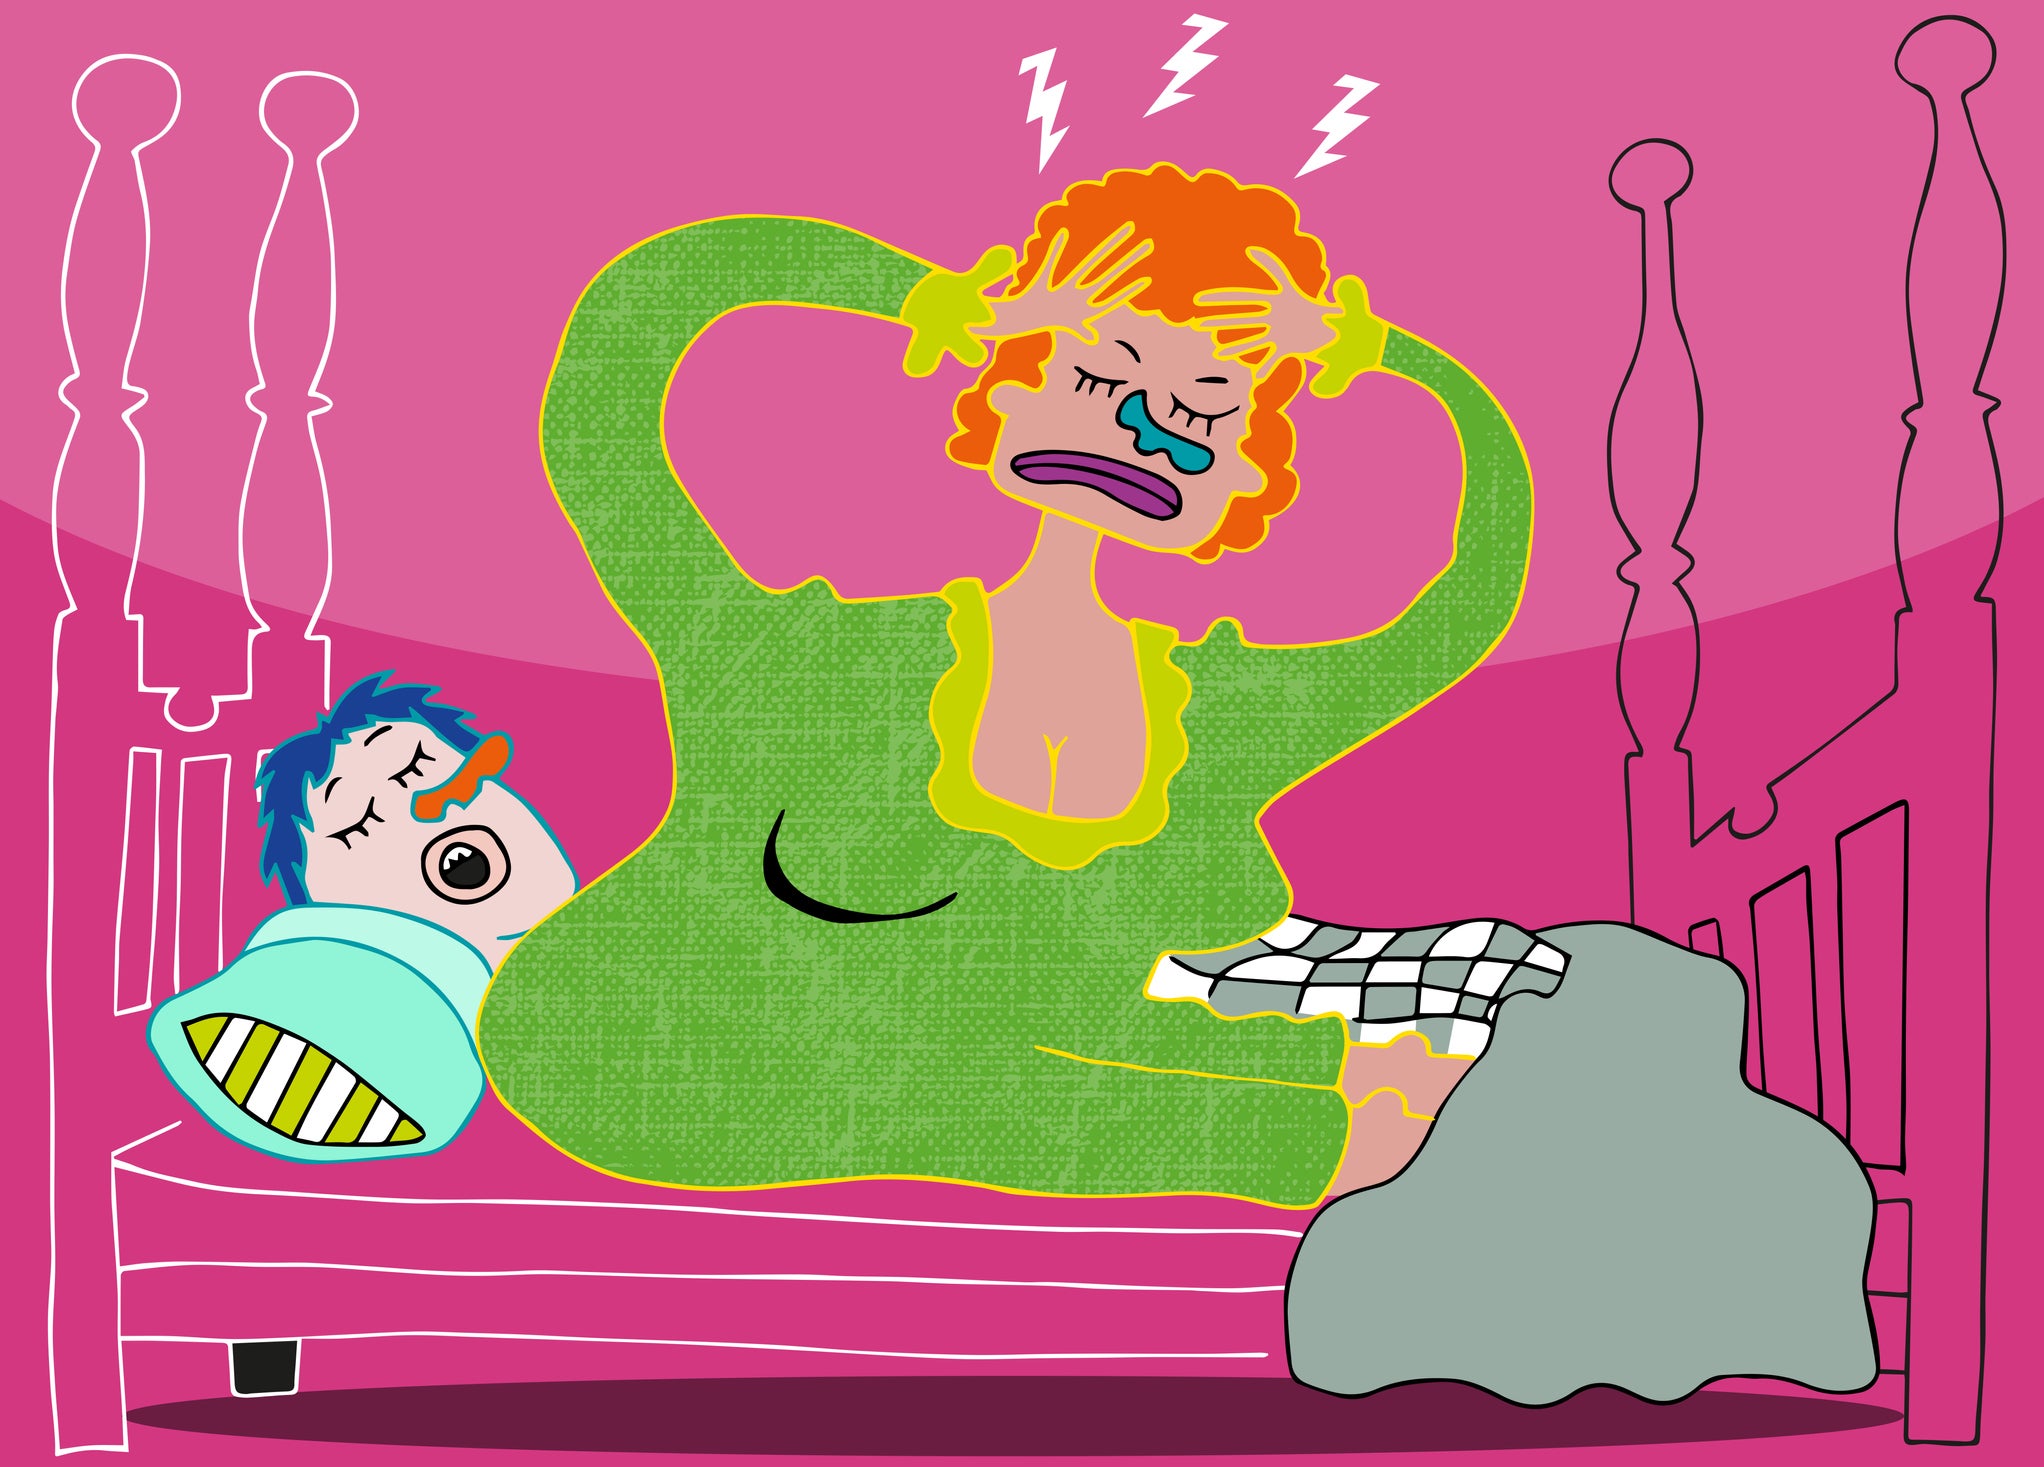 Waking up in the middle of the night is a common symptom of the menopause